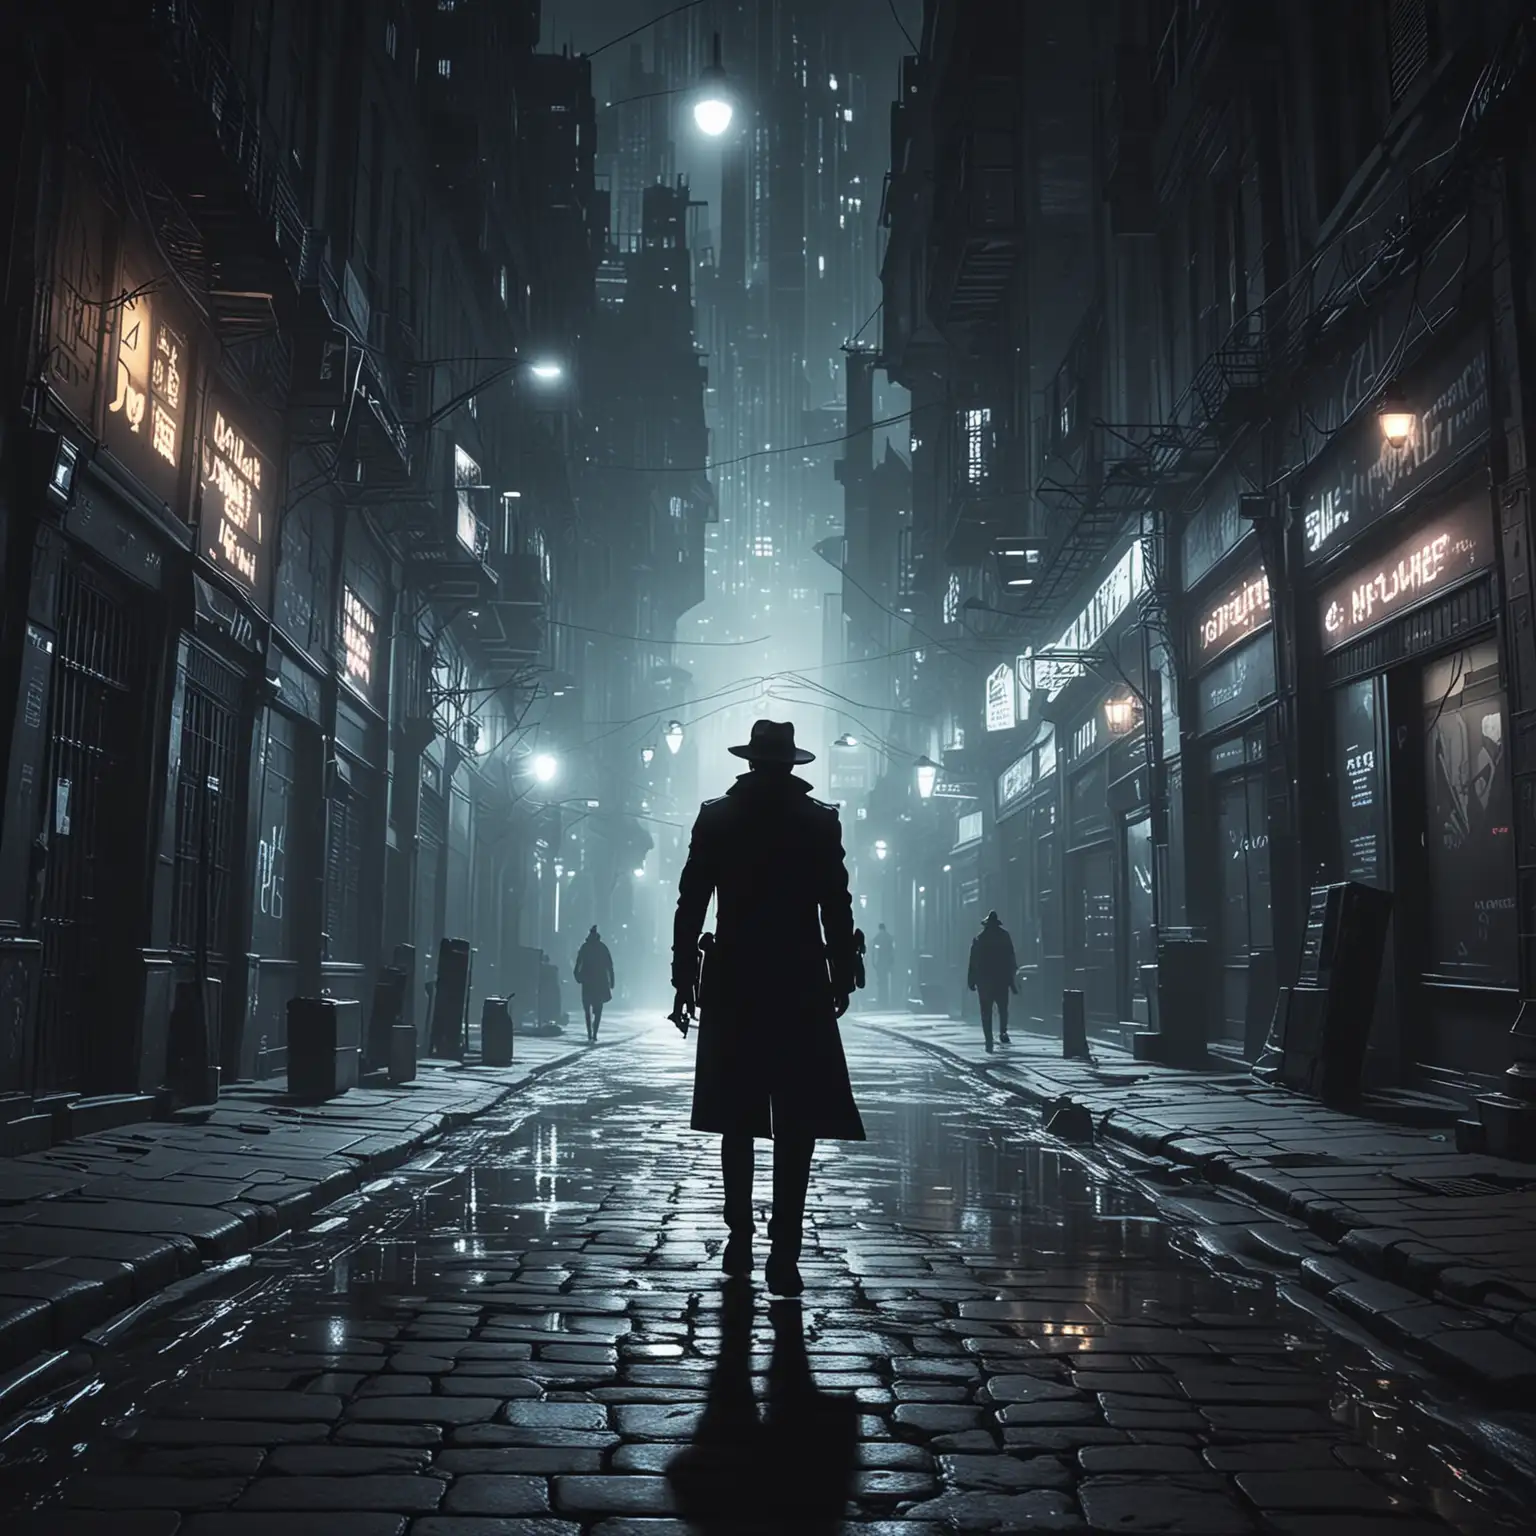 Shadow Worker in the street, Arcane Algorithms fly through the air, midnight mood, Eyes in the dark detective in a very futuristic city

